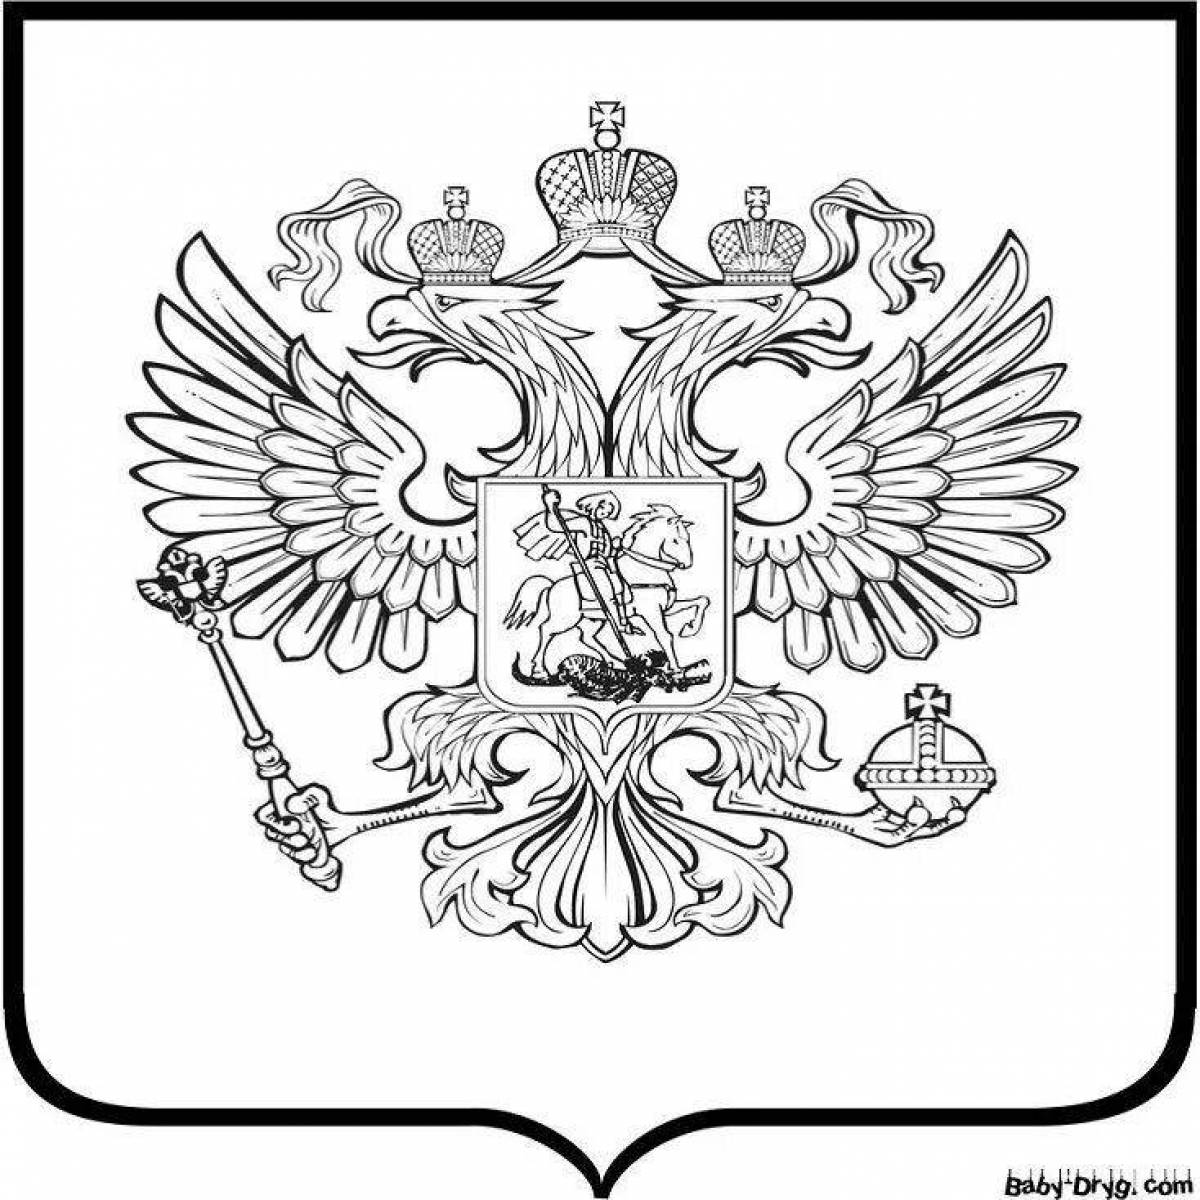 Coat of arms of the Russian Federation #13